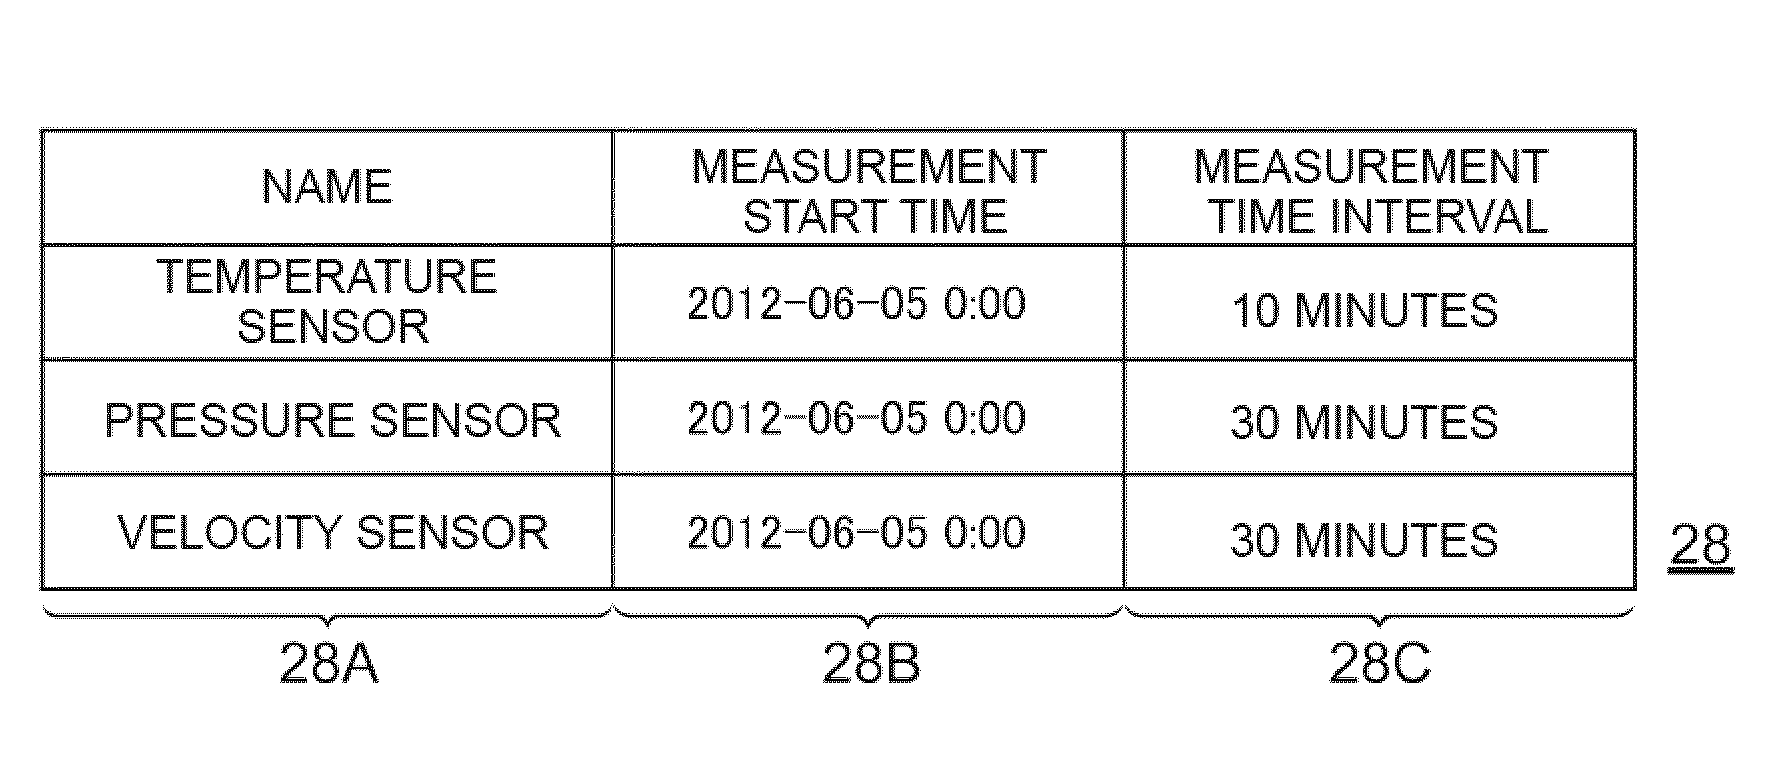 Time series data processing apparatus and method, and storage medium